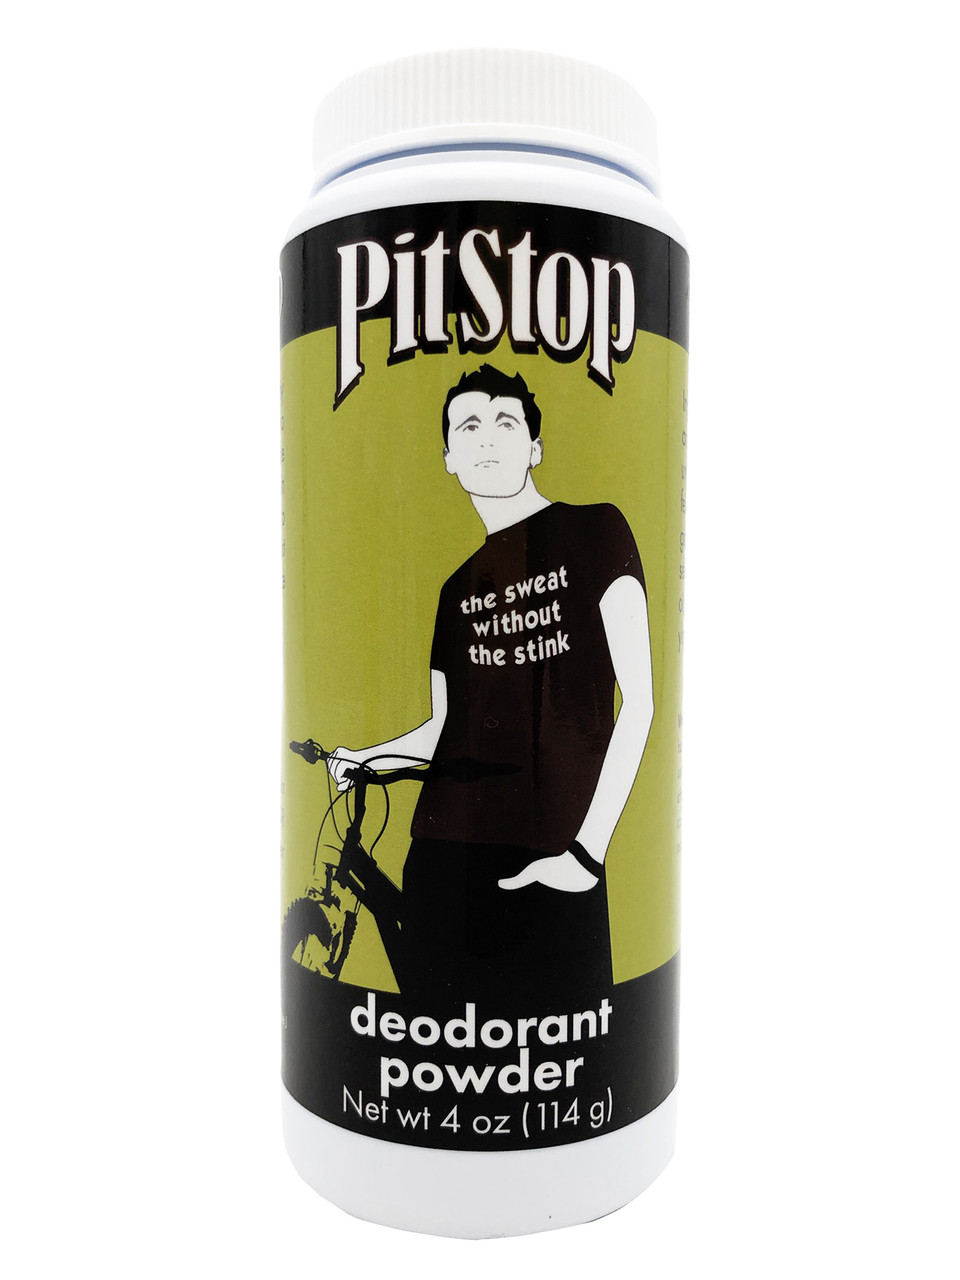 Pit Stop Deodorant For Men by Muddy H2O Etc 4 oz - Good-Earth Store